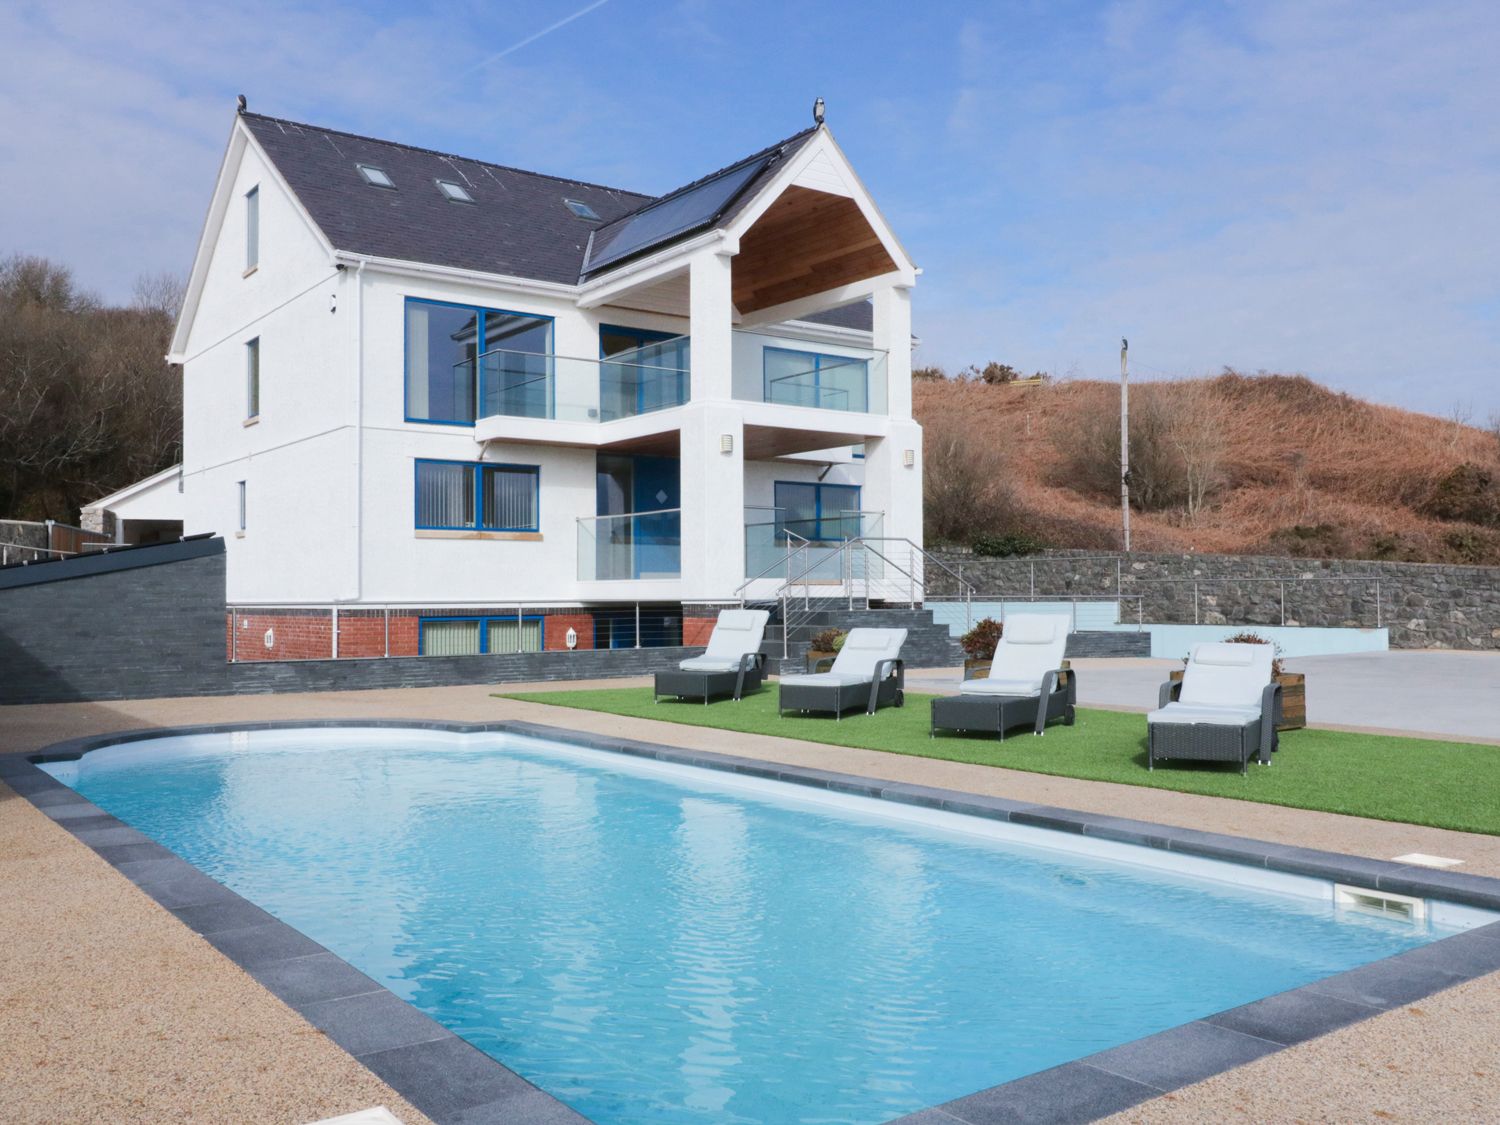 Beach House Apartment - Anglesey - 917769 - photo 1